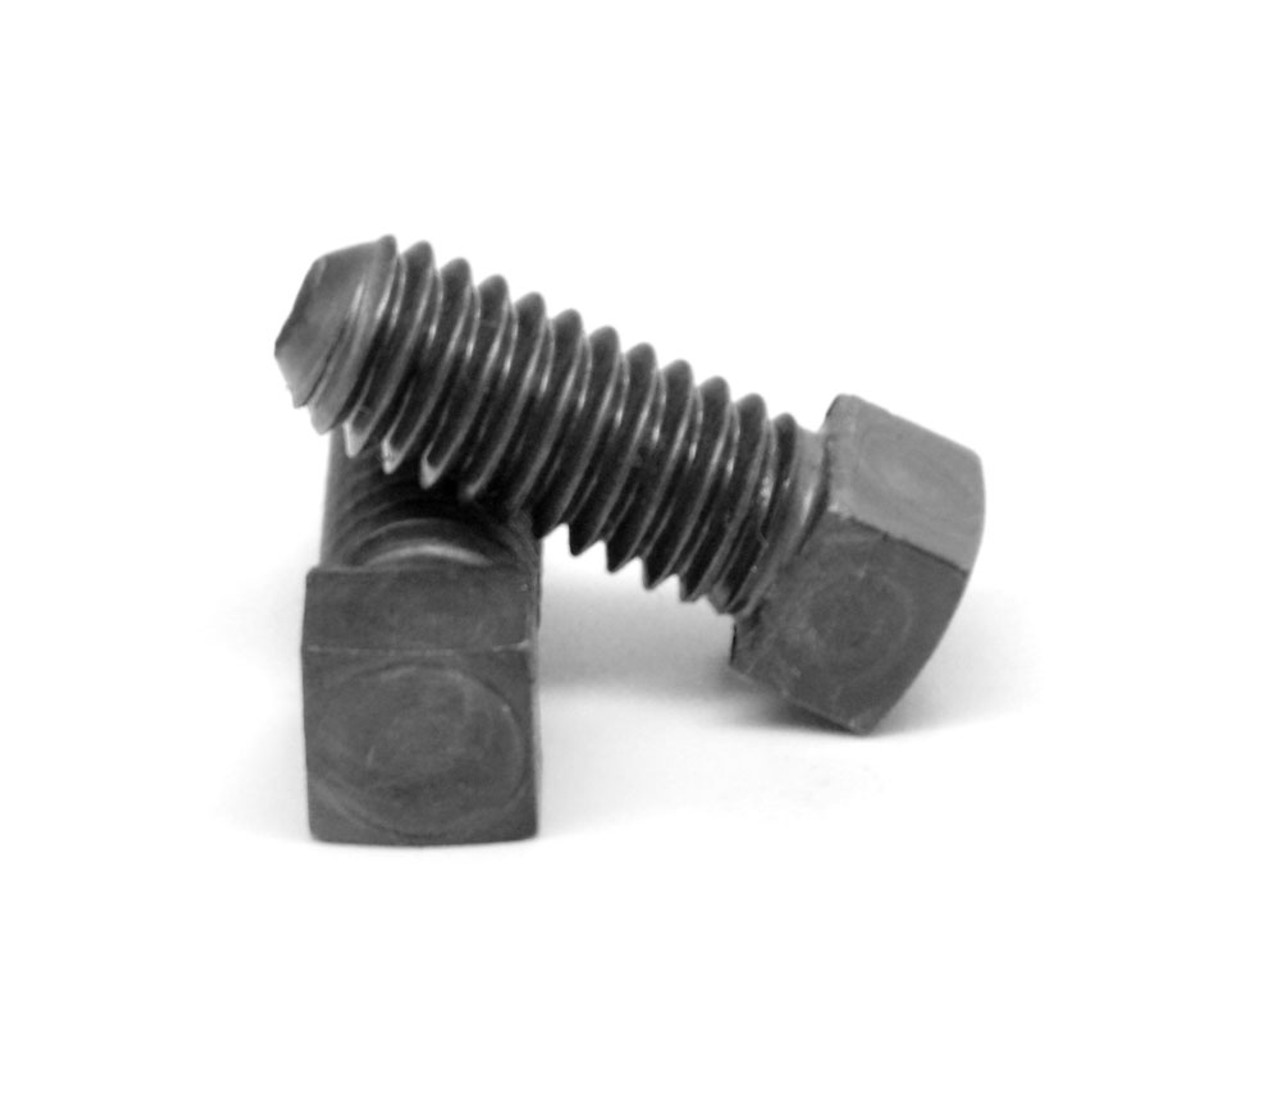 1/4"-20 x 3 1/2" (FT) Coarse Thread Square Head Set Screw Cup Point Low Carbon Steel Case Hardened Plain Finish